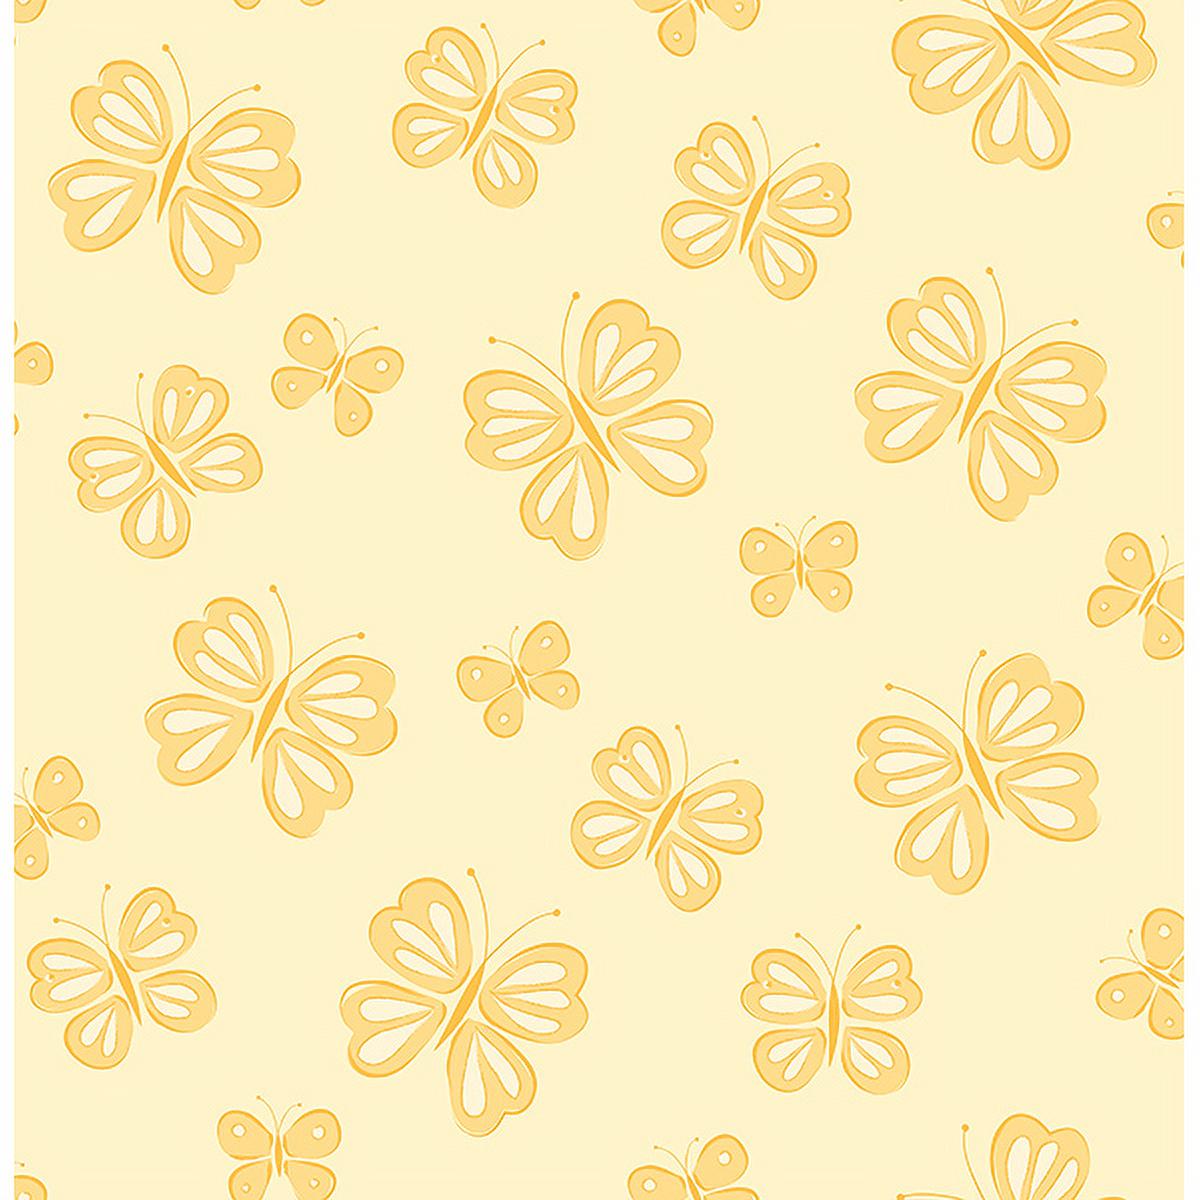 A seamless repeating pattern of yellow butterflies on a yellow background - Honey